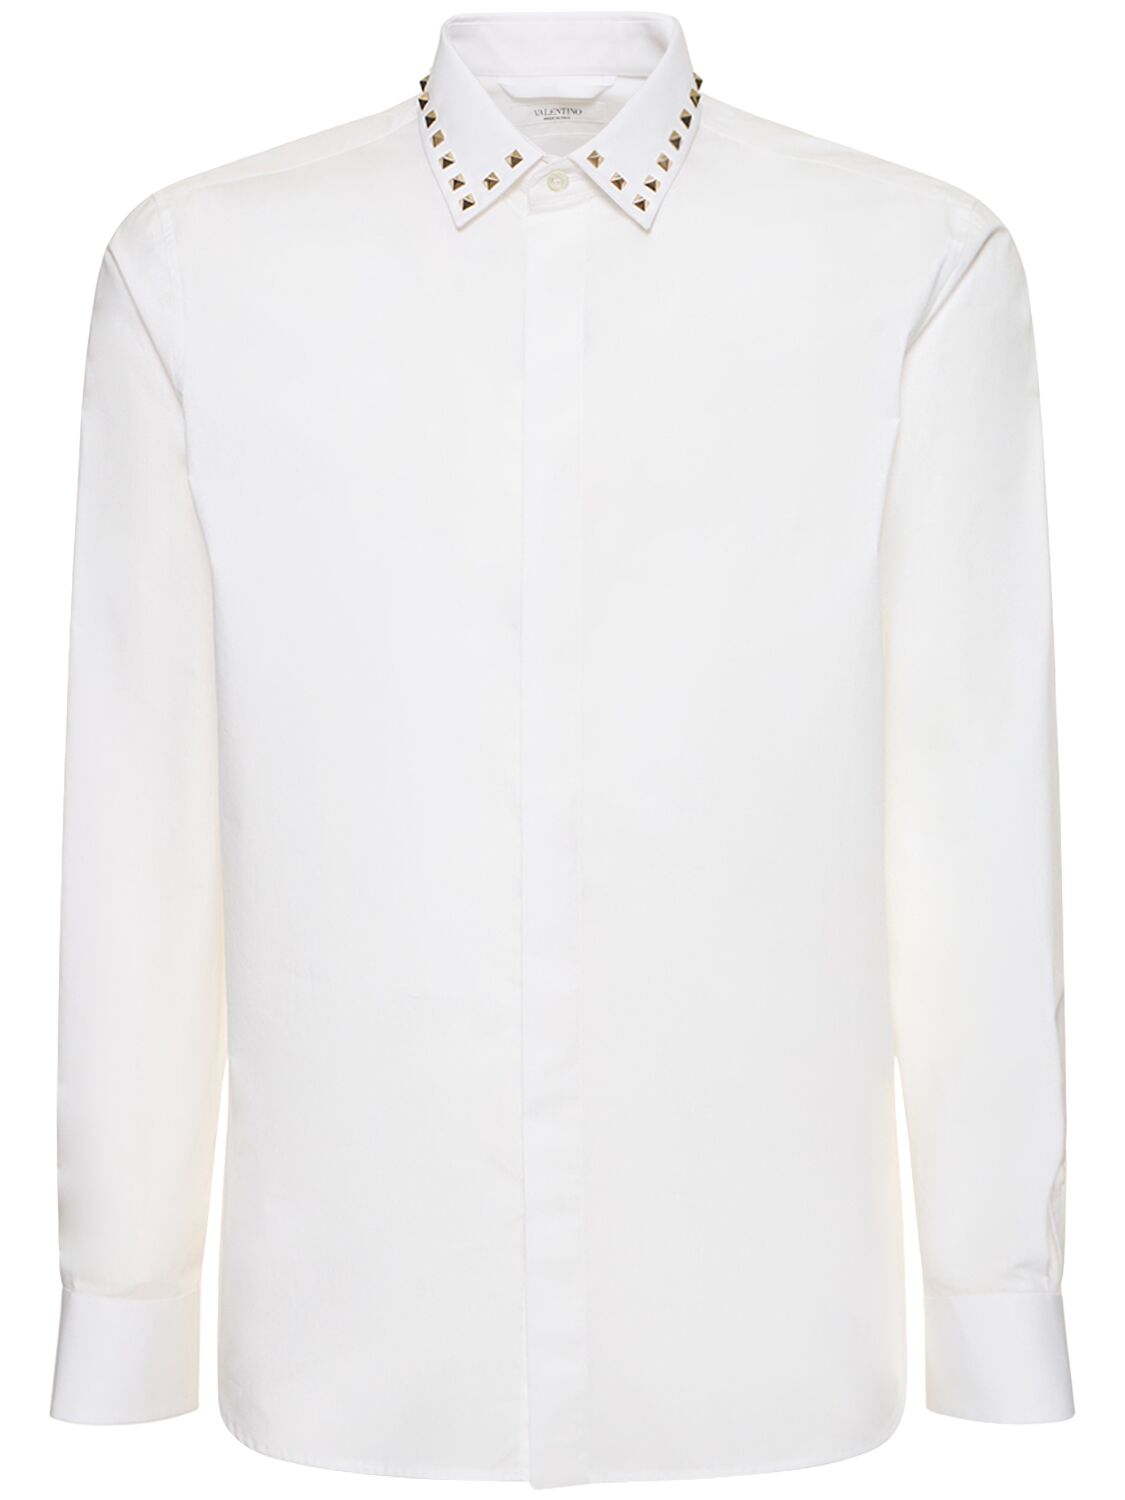 Image of Studded Classic Cotton Shirt